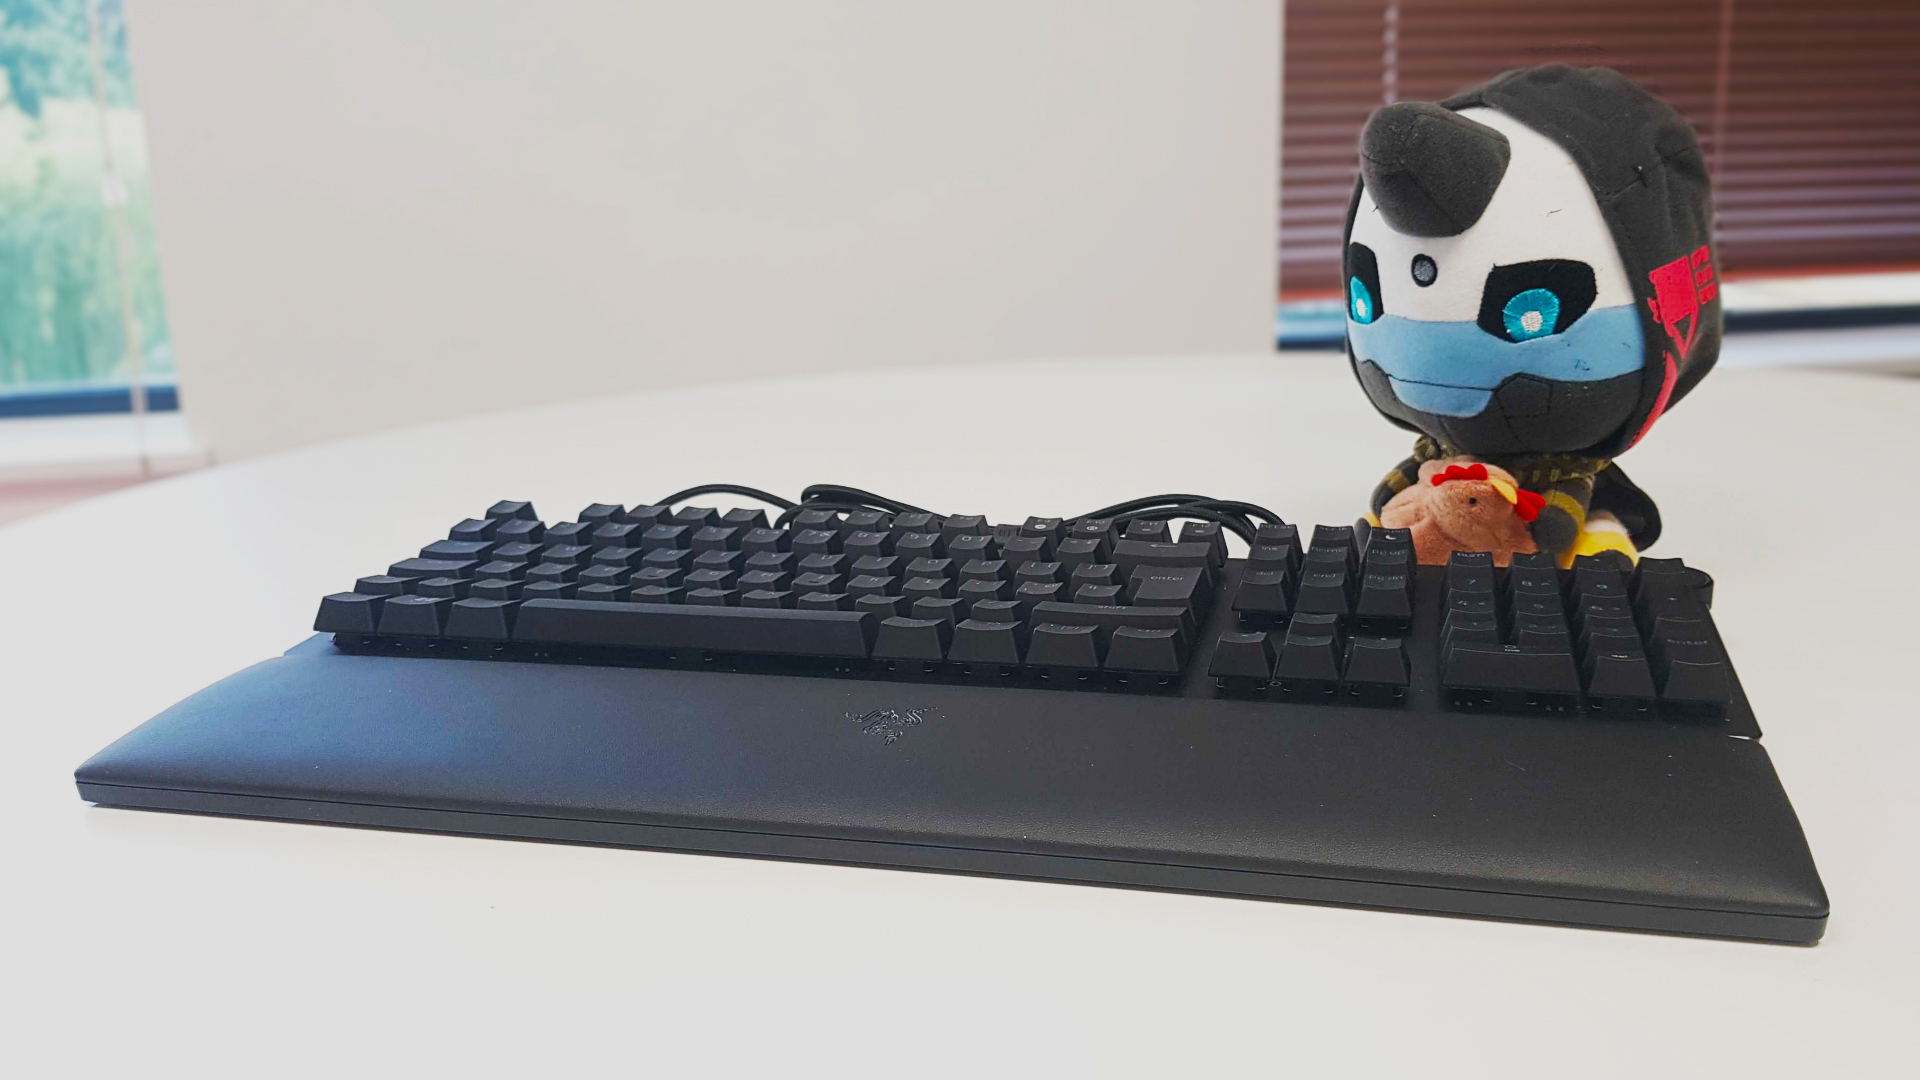 The Razer Huntsman 2 front view, with Cayde-6 plushie in shot